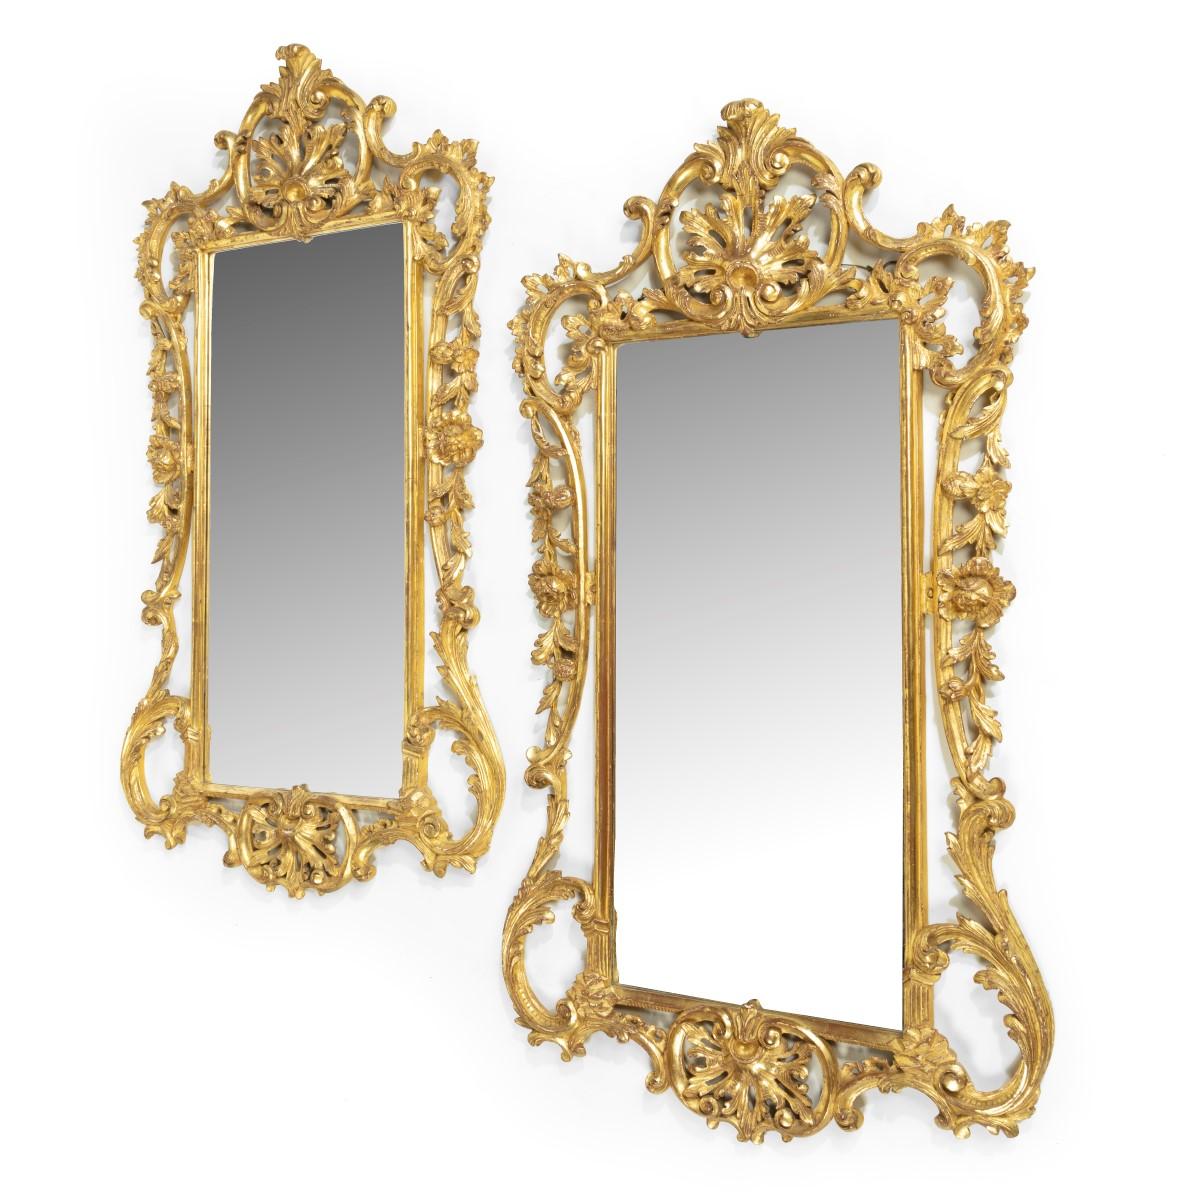 A pair of Victorian giltwood mirrors in the Chippendale style, each with a rectangular plate enclosed within an ornate openwork frame carved with a symmetrical arrangement of C-scrolls, acanthus leaves and rocailles.